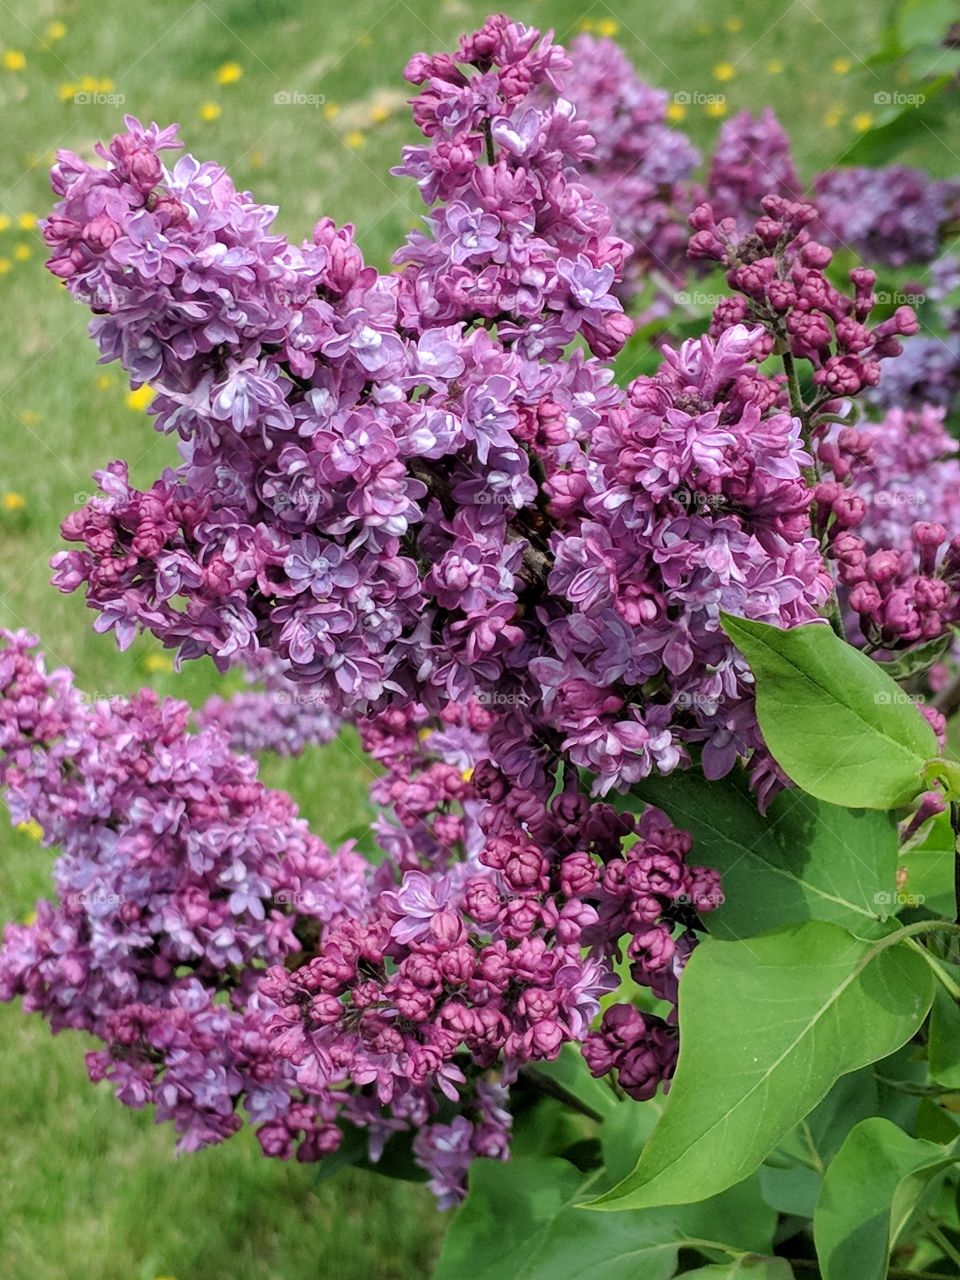 lilac with lavendar blooms and flowers